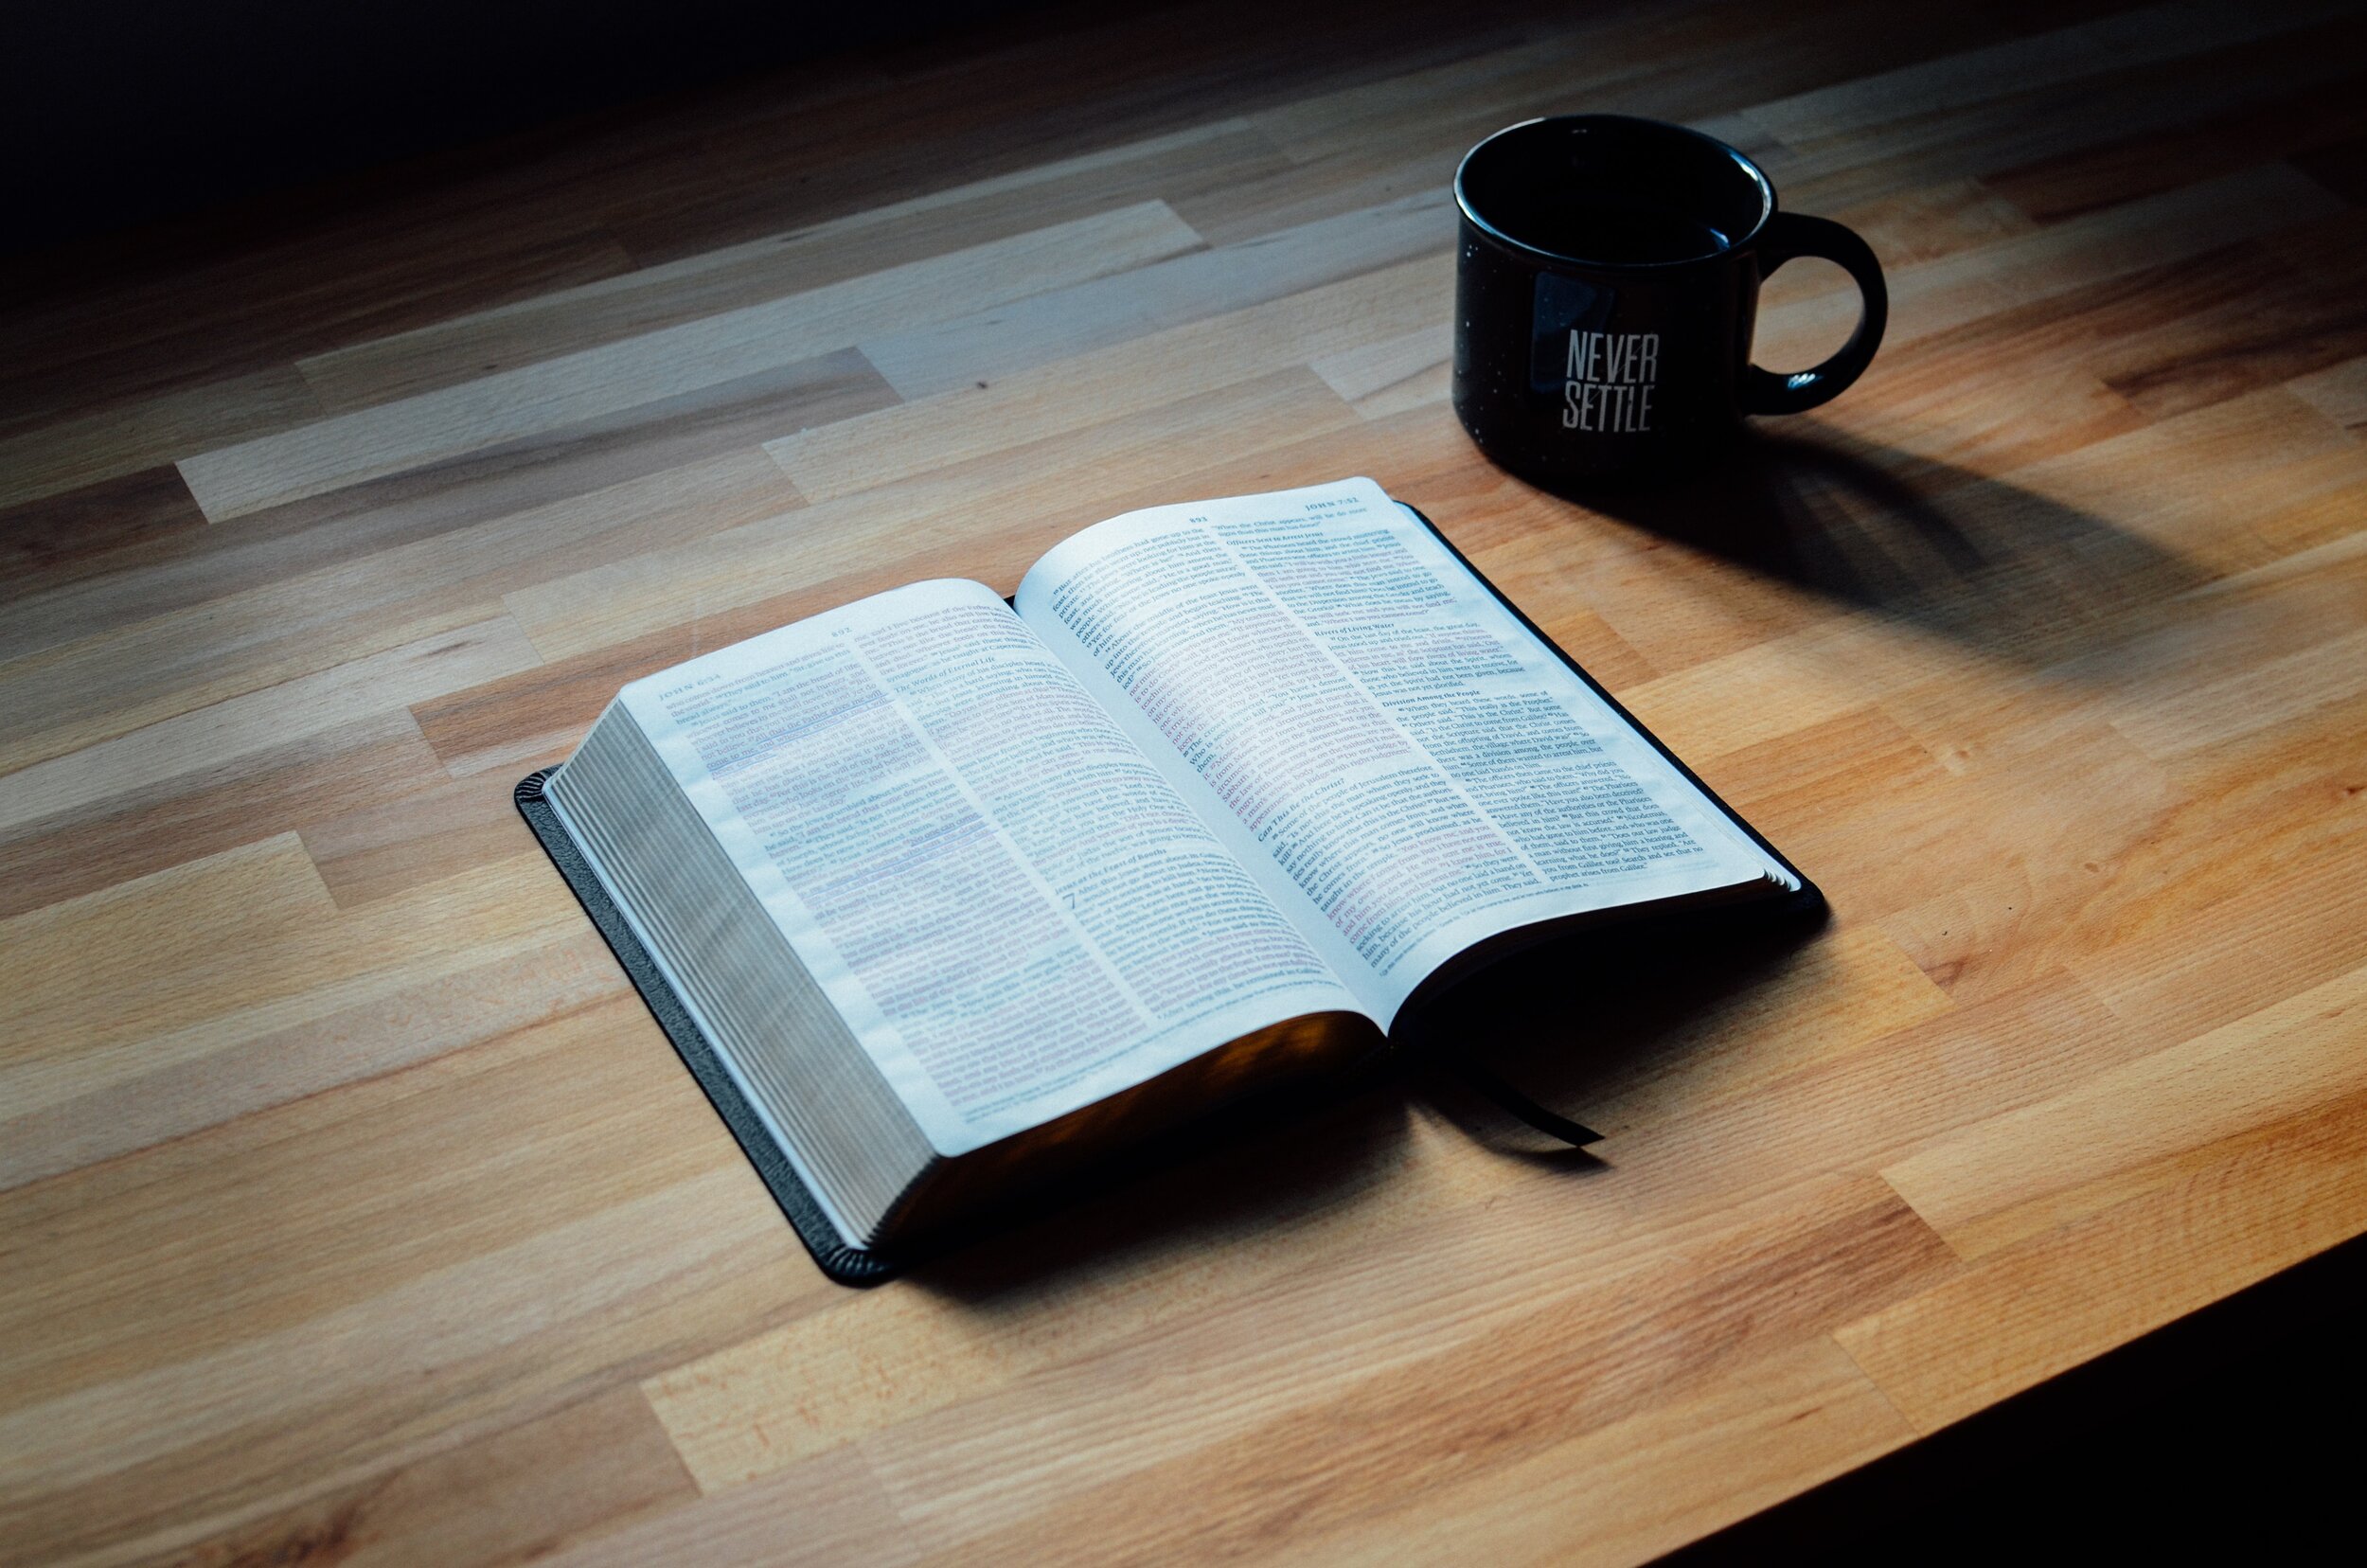   Saturday Men’s Bible Study   Men are invited for breakfast and Bible study on the 1st and 3rd Saturdays of the month from 9:00 to 11:30 a.m. in person and on zoom. 